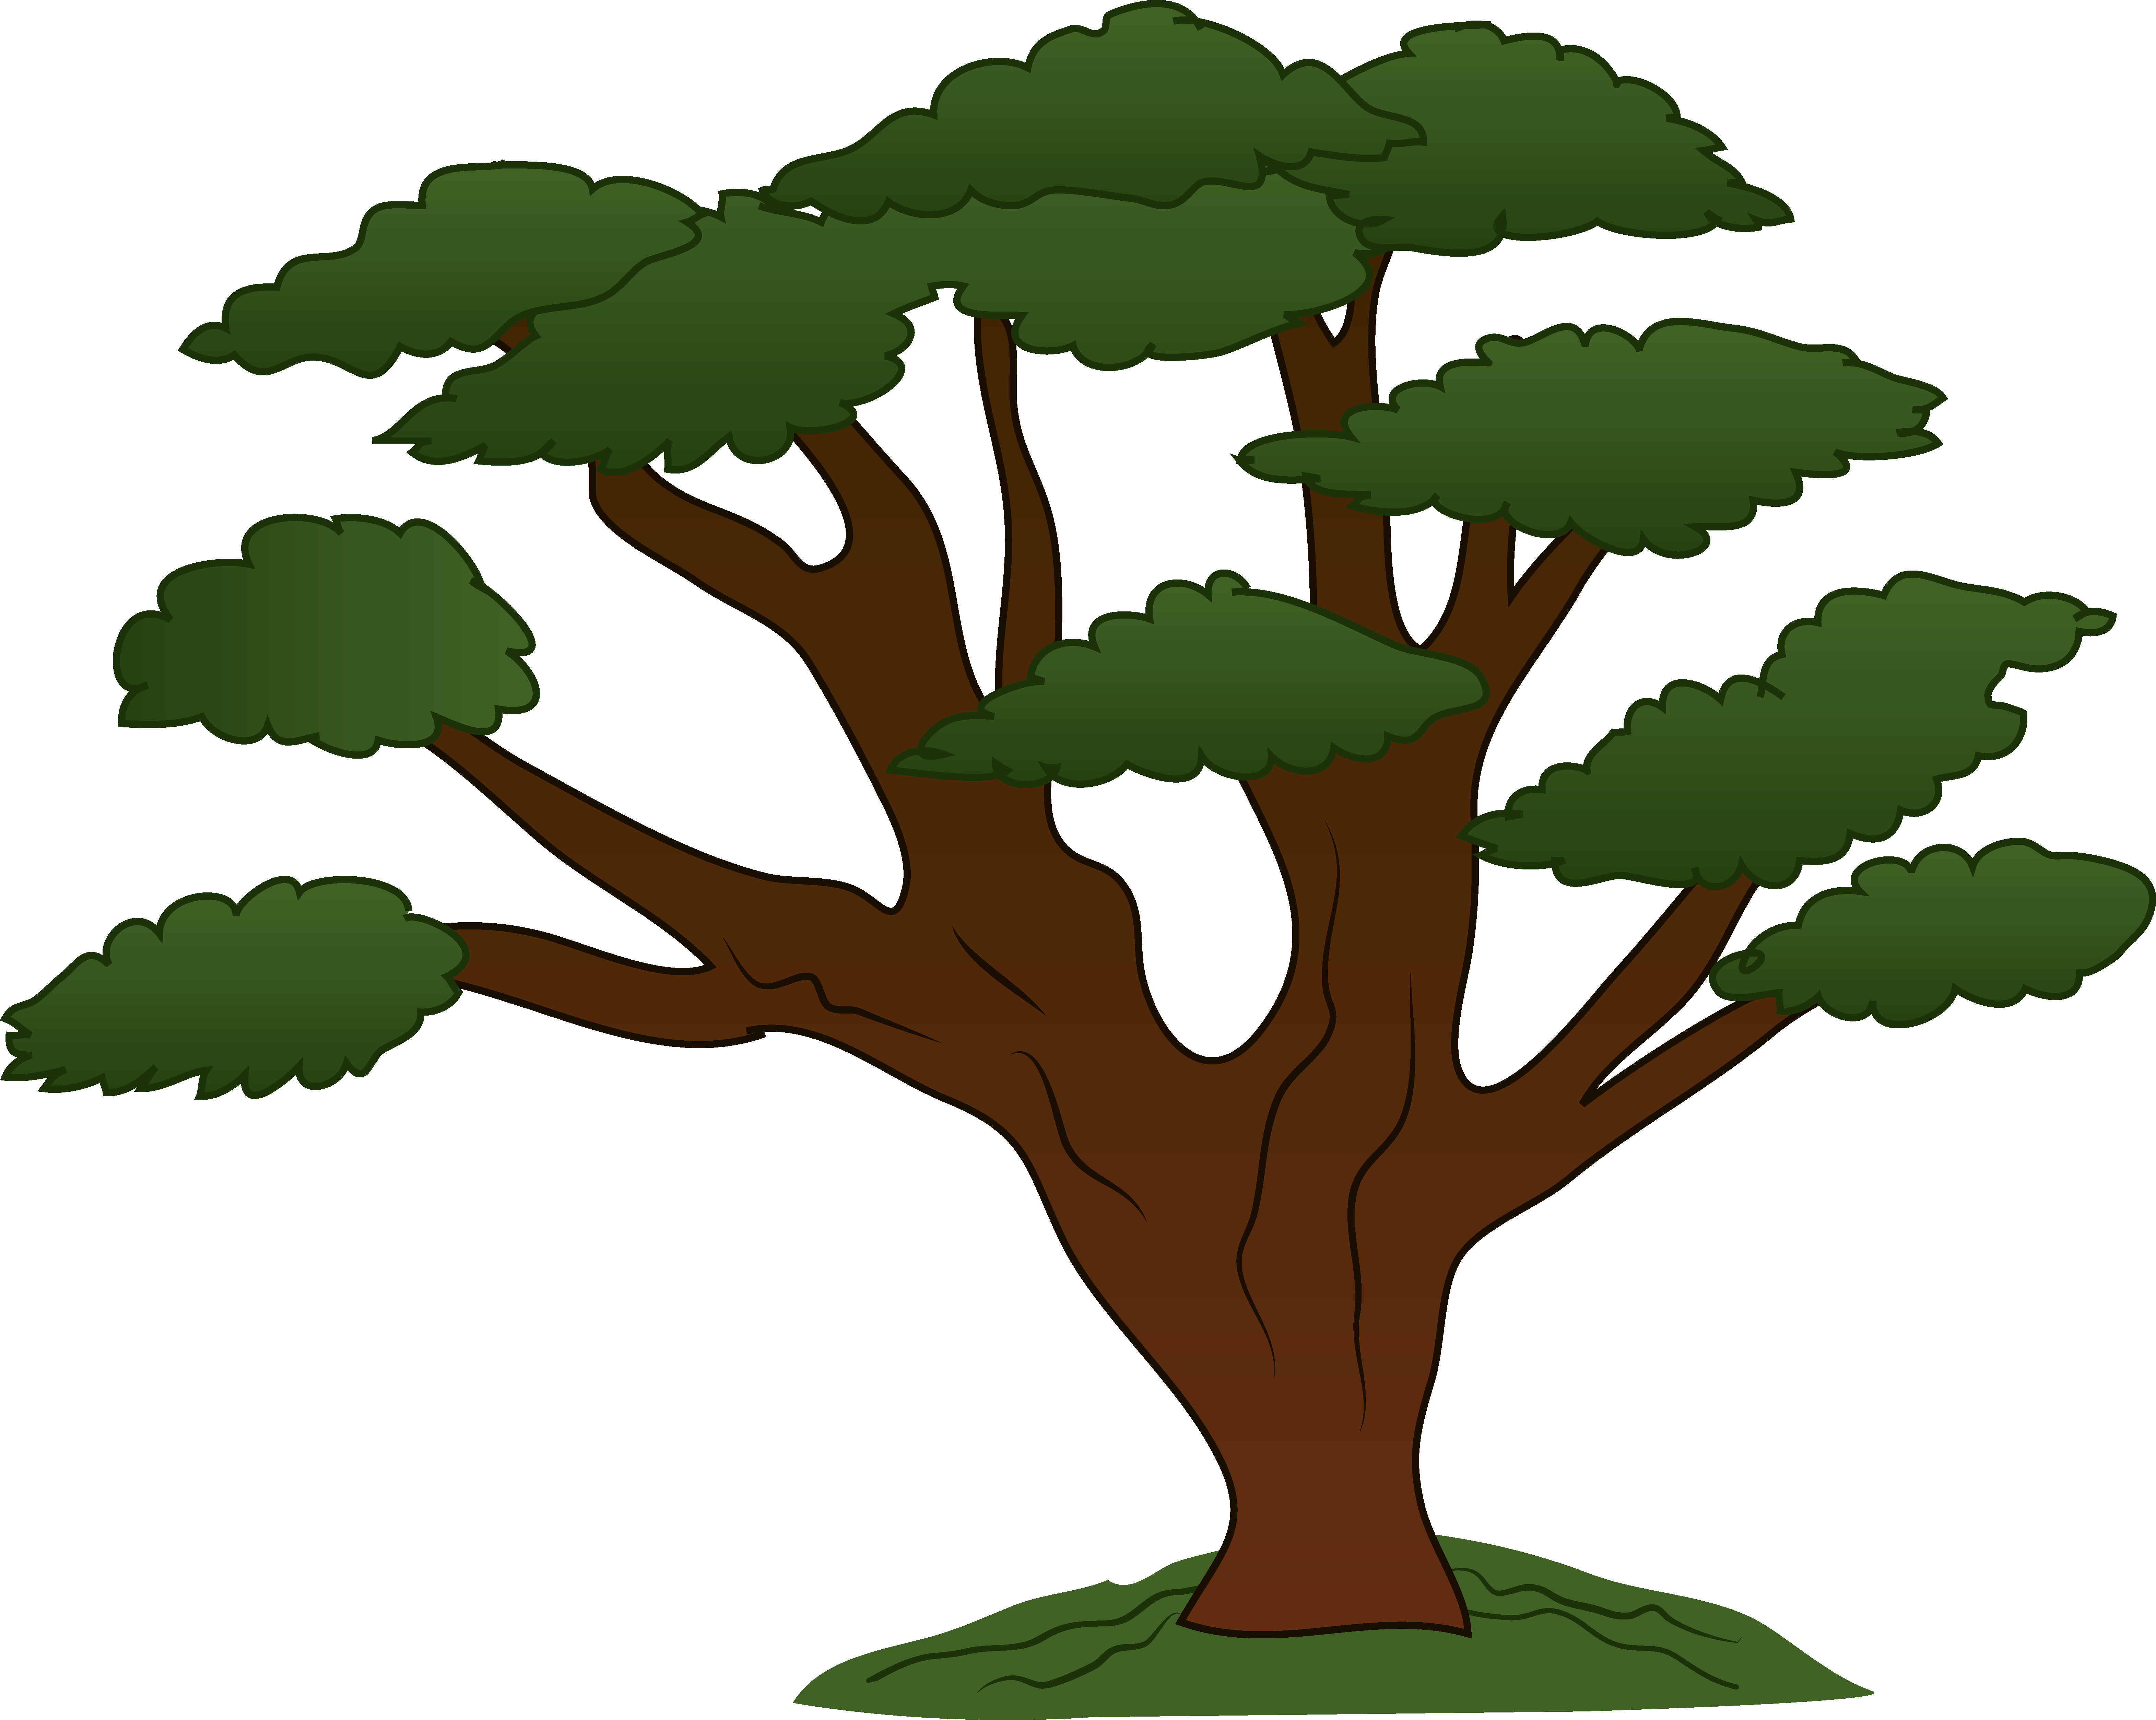 Growth clipart tree icon. Of life sweeping oak